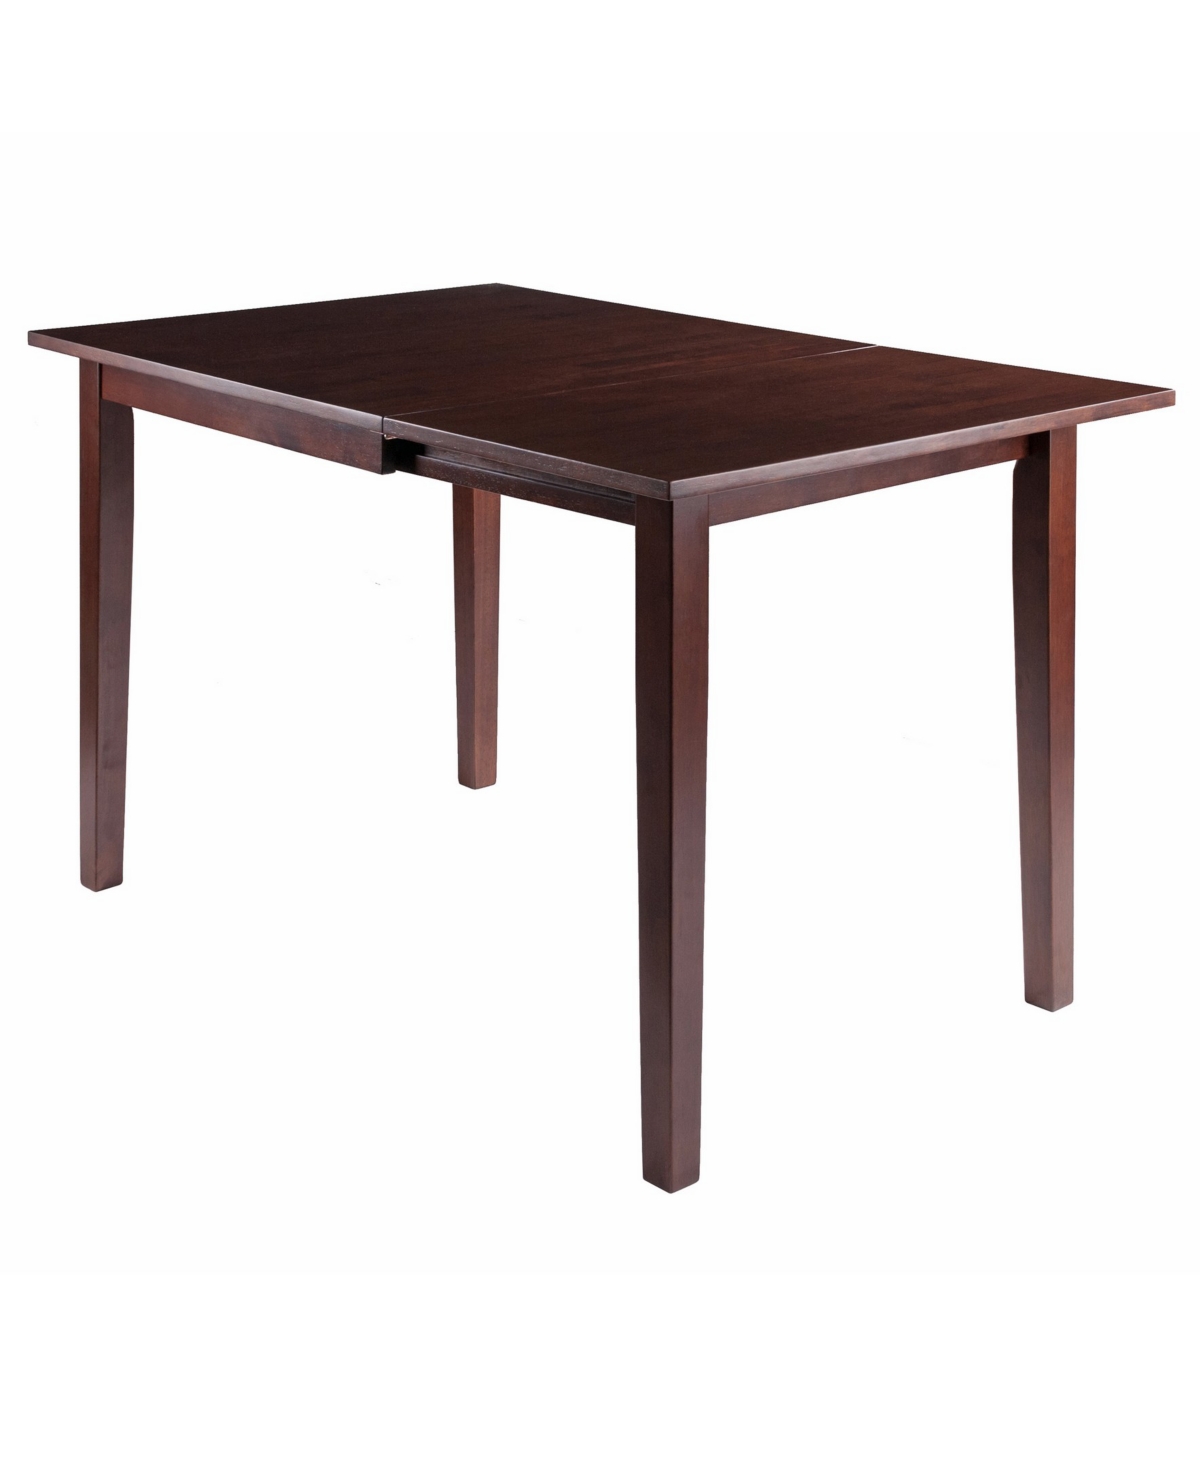 Winsome Perrone 29.13" Wood Drop Leaf Dining Table In Walnut